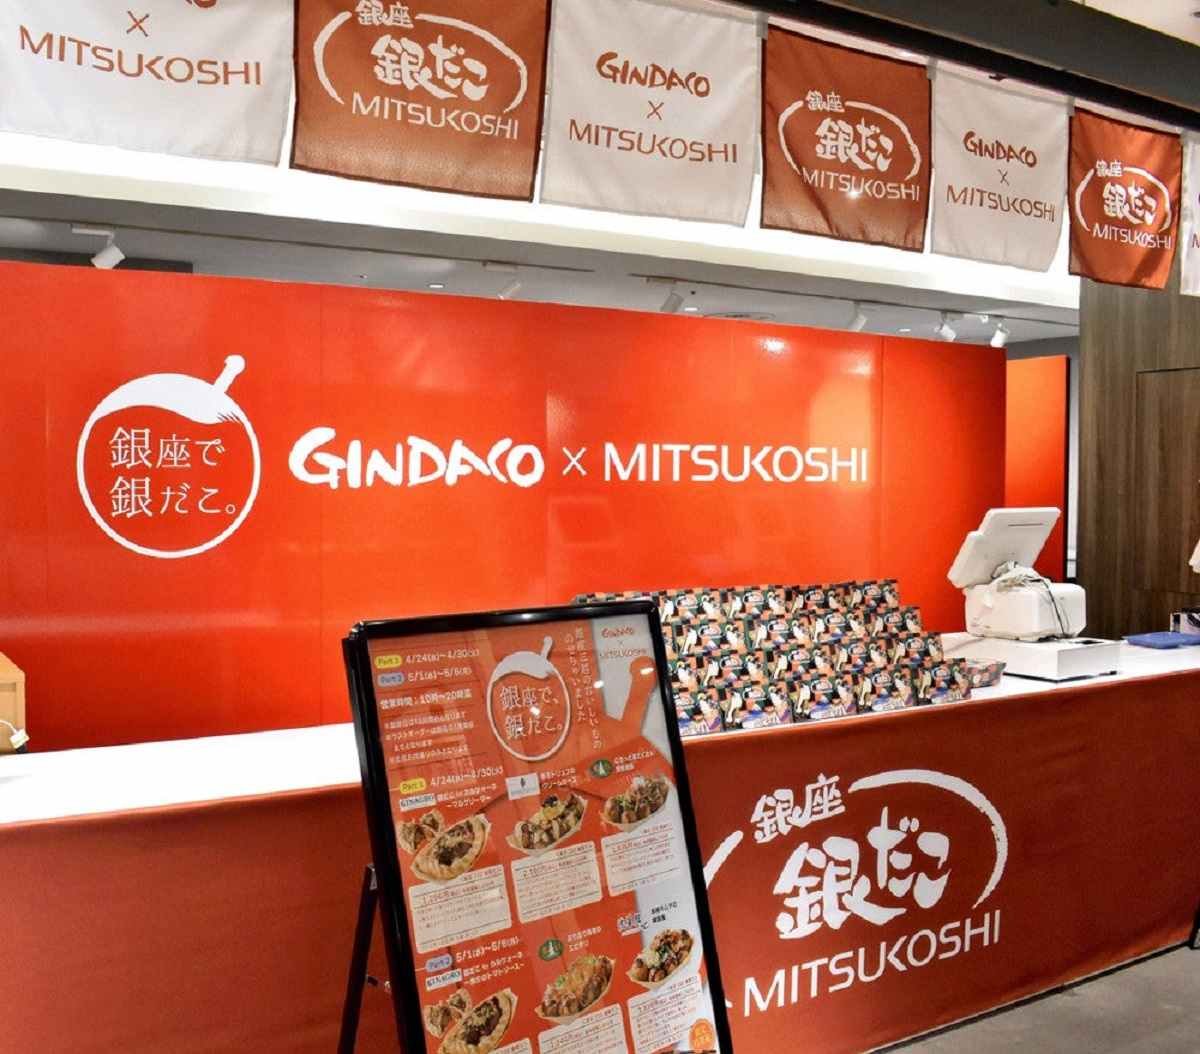 Ginza Mitsukoshi department store is hosting a festive food event to attract tourists during Golden Week